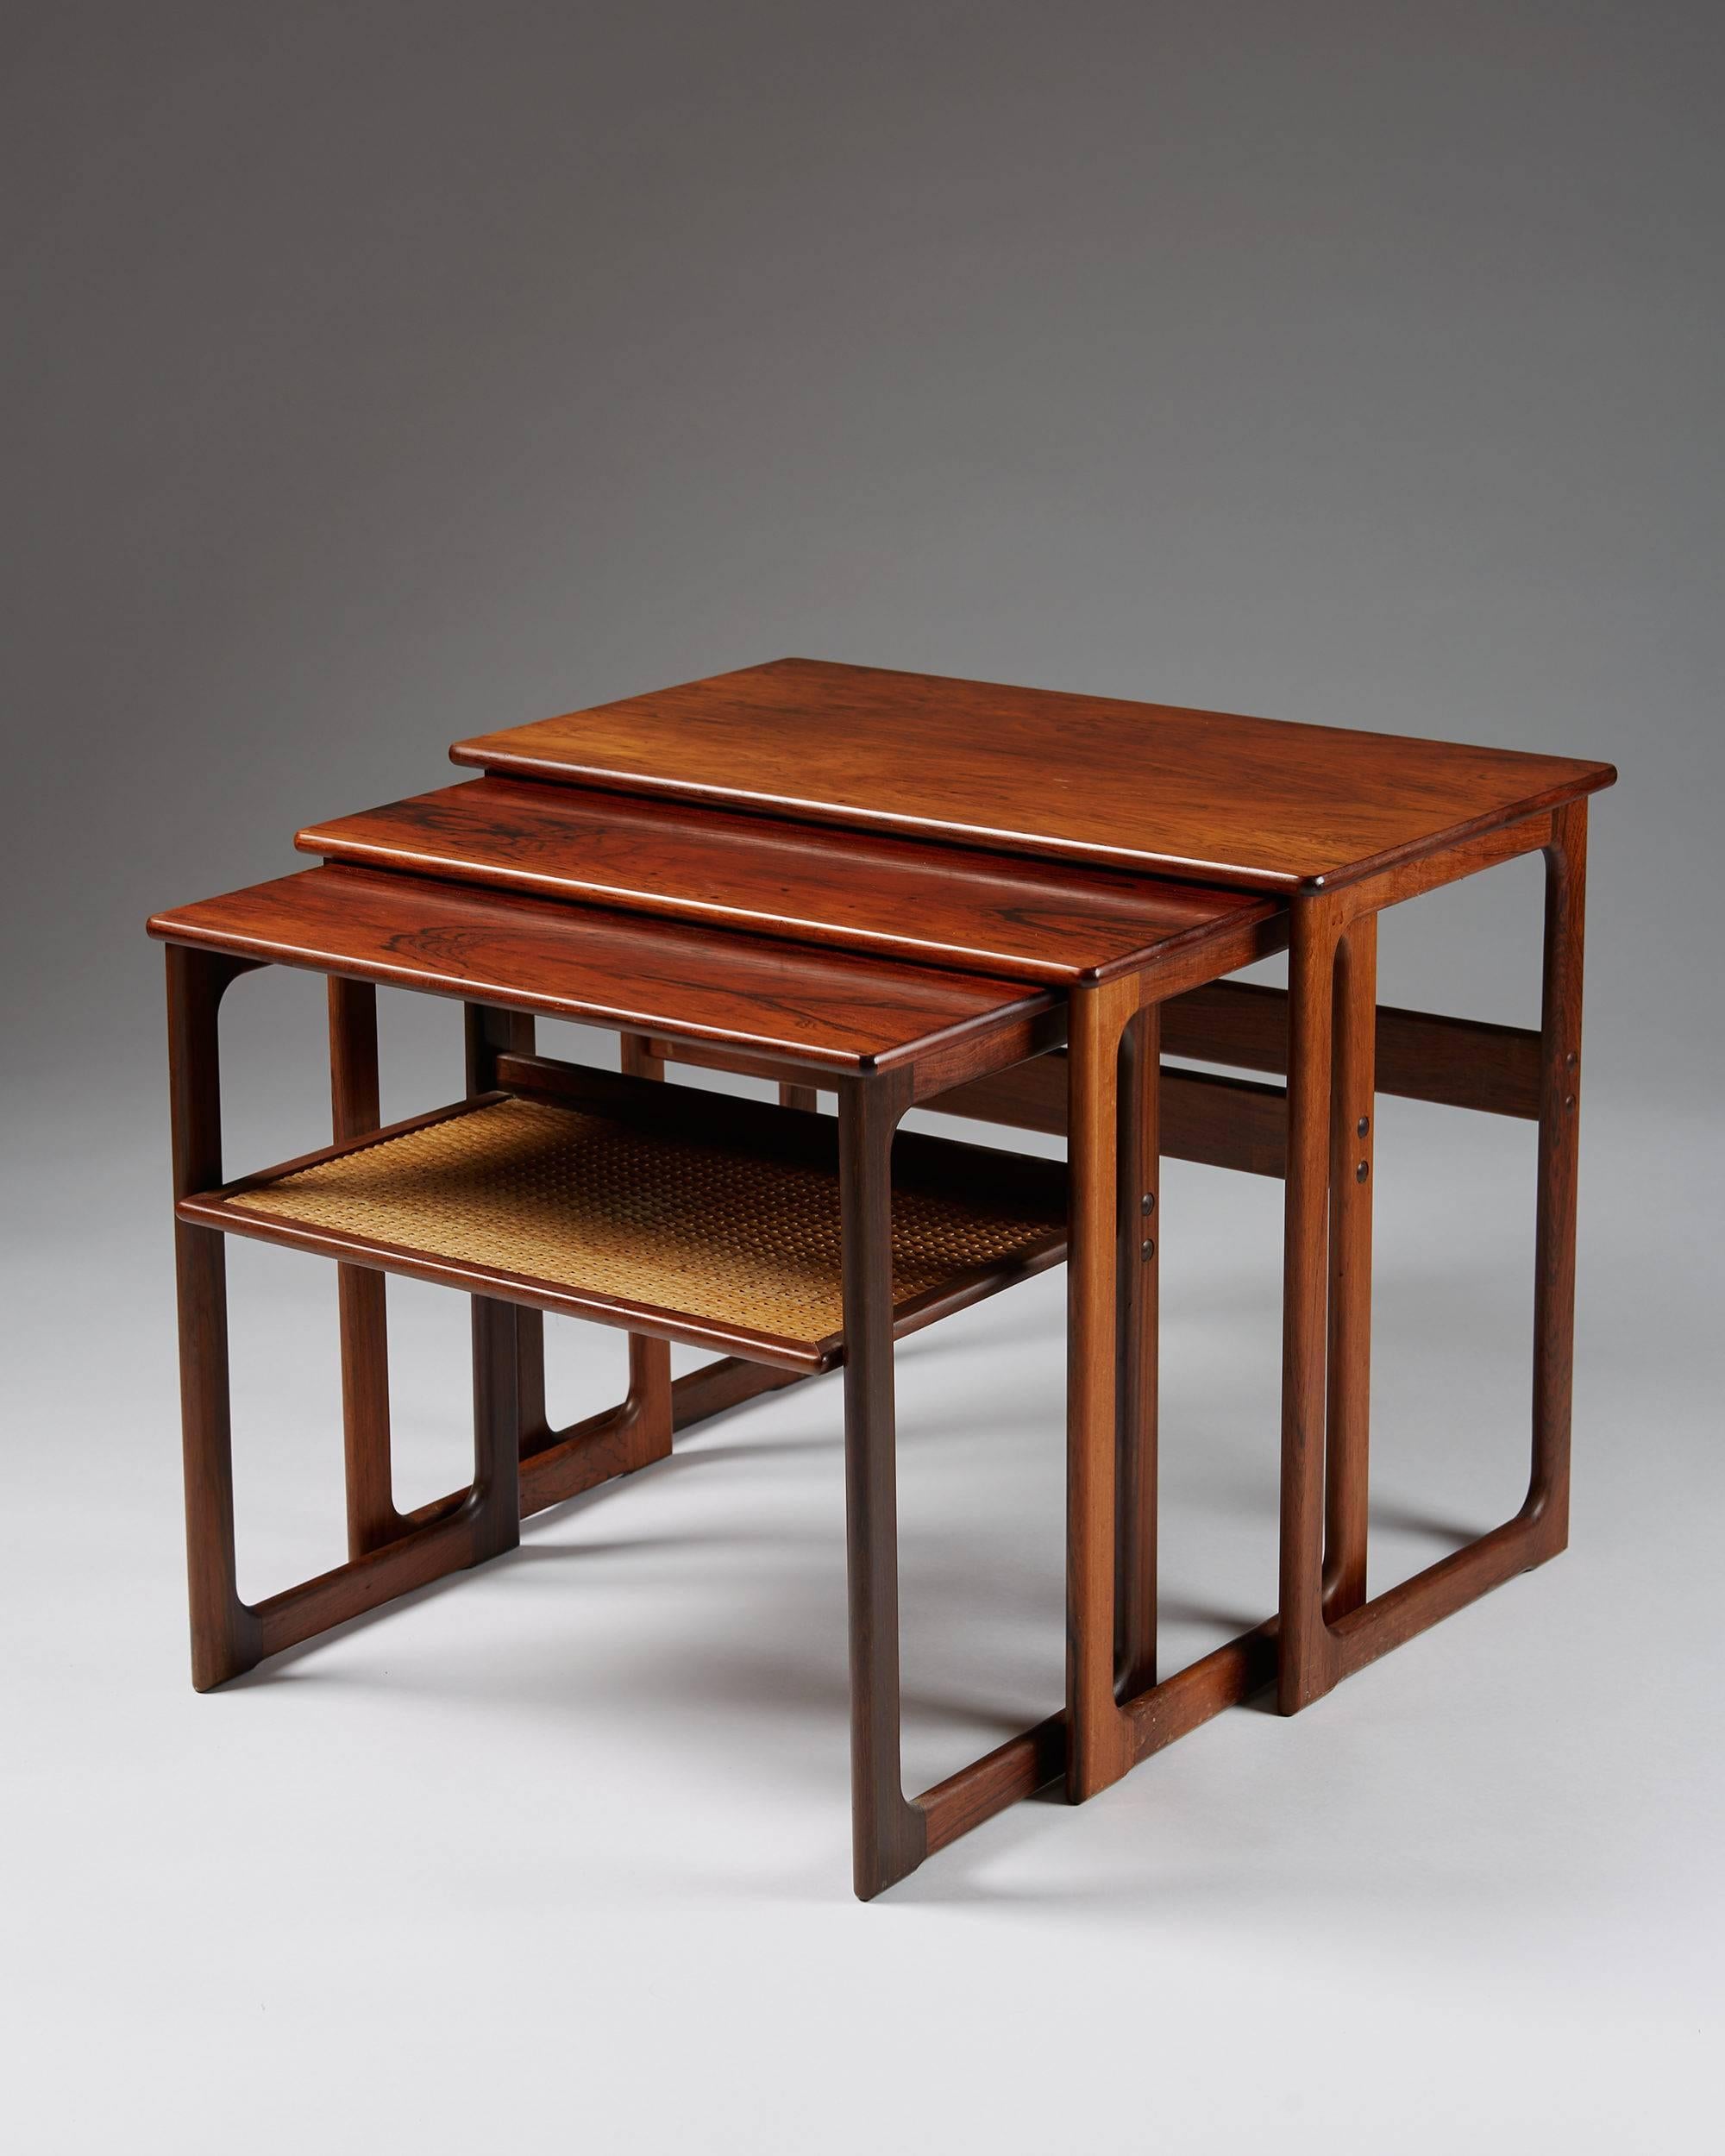 Nest of tables designed by Johannes Andersen for CFC Silkeborg,
Denmark, 1960s.

Rosewood and cane.

Measures: H: 53 cm / 20 3/4''
W: 65 cm / 25 1/2''
D: 37 cm / 14 1/2''